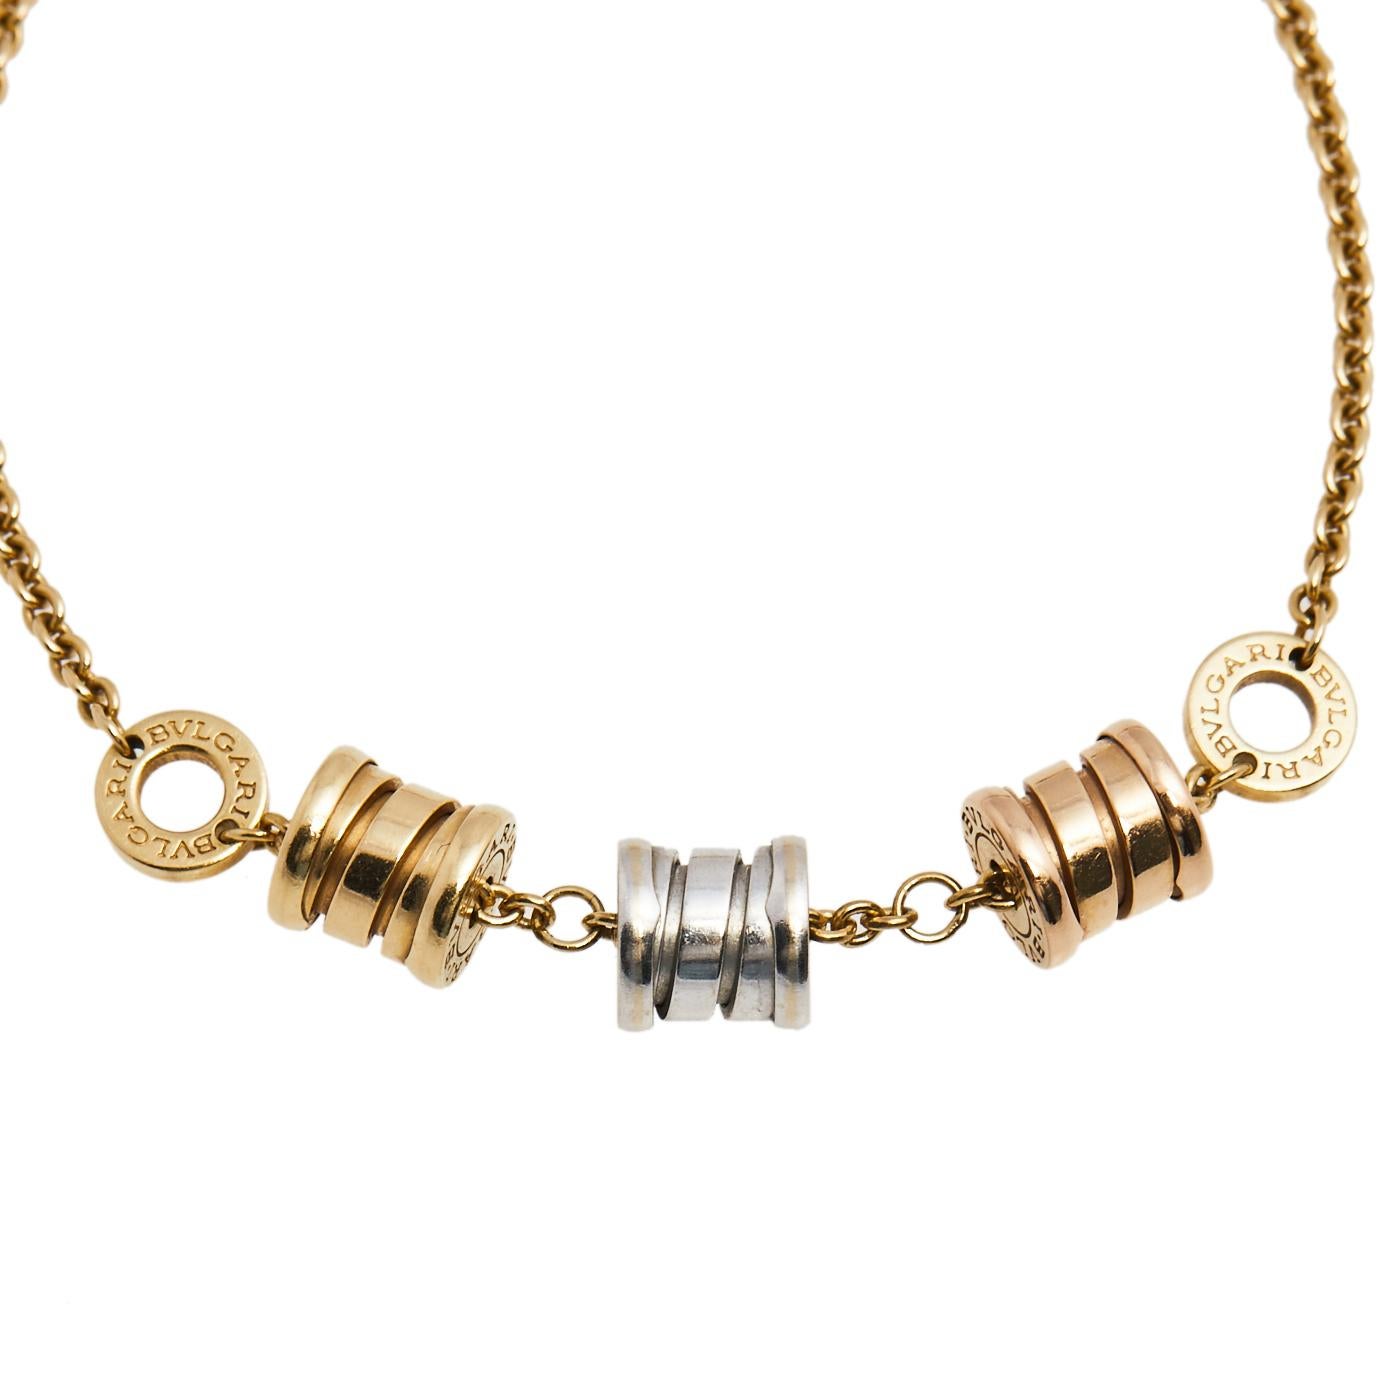 This Bvlgari bracelet is from the B.Zero1 collection and brings three signature spiral motifs in 18k white, yellow, and rose gold. A simple chain holds these instantly recognizable charms. Well-crafted and simply appealing, this creation is worth